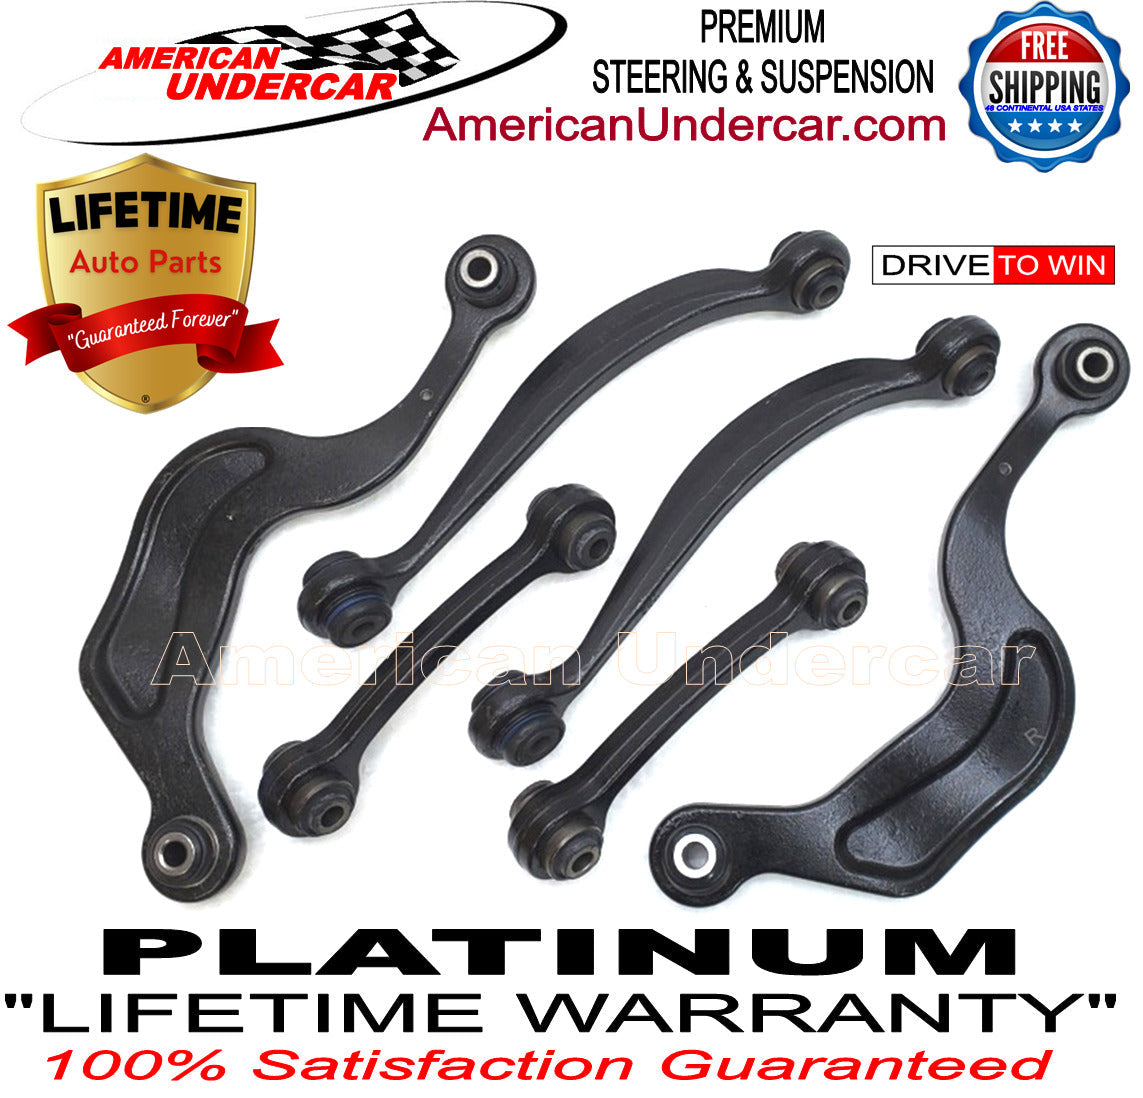 Lifetime Control Arm Link Rear Suspension Kit for 2007-2010 Saturn Outlook 2WD, AWD